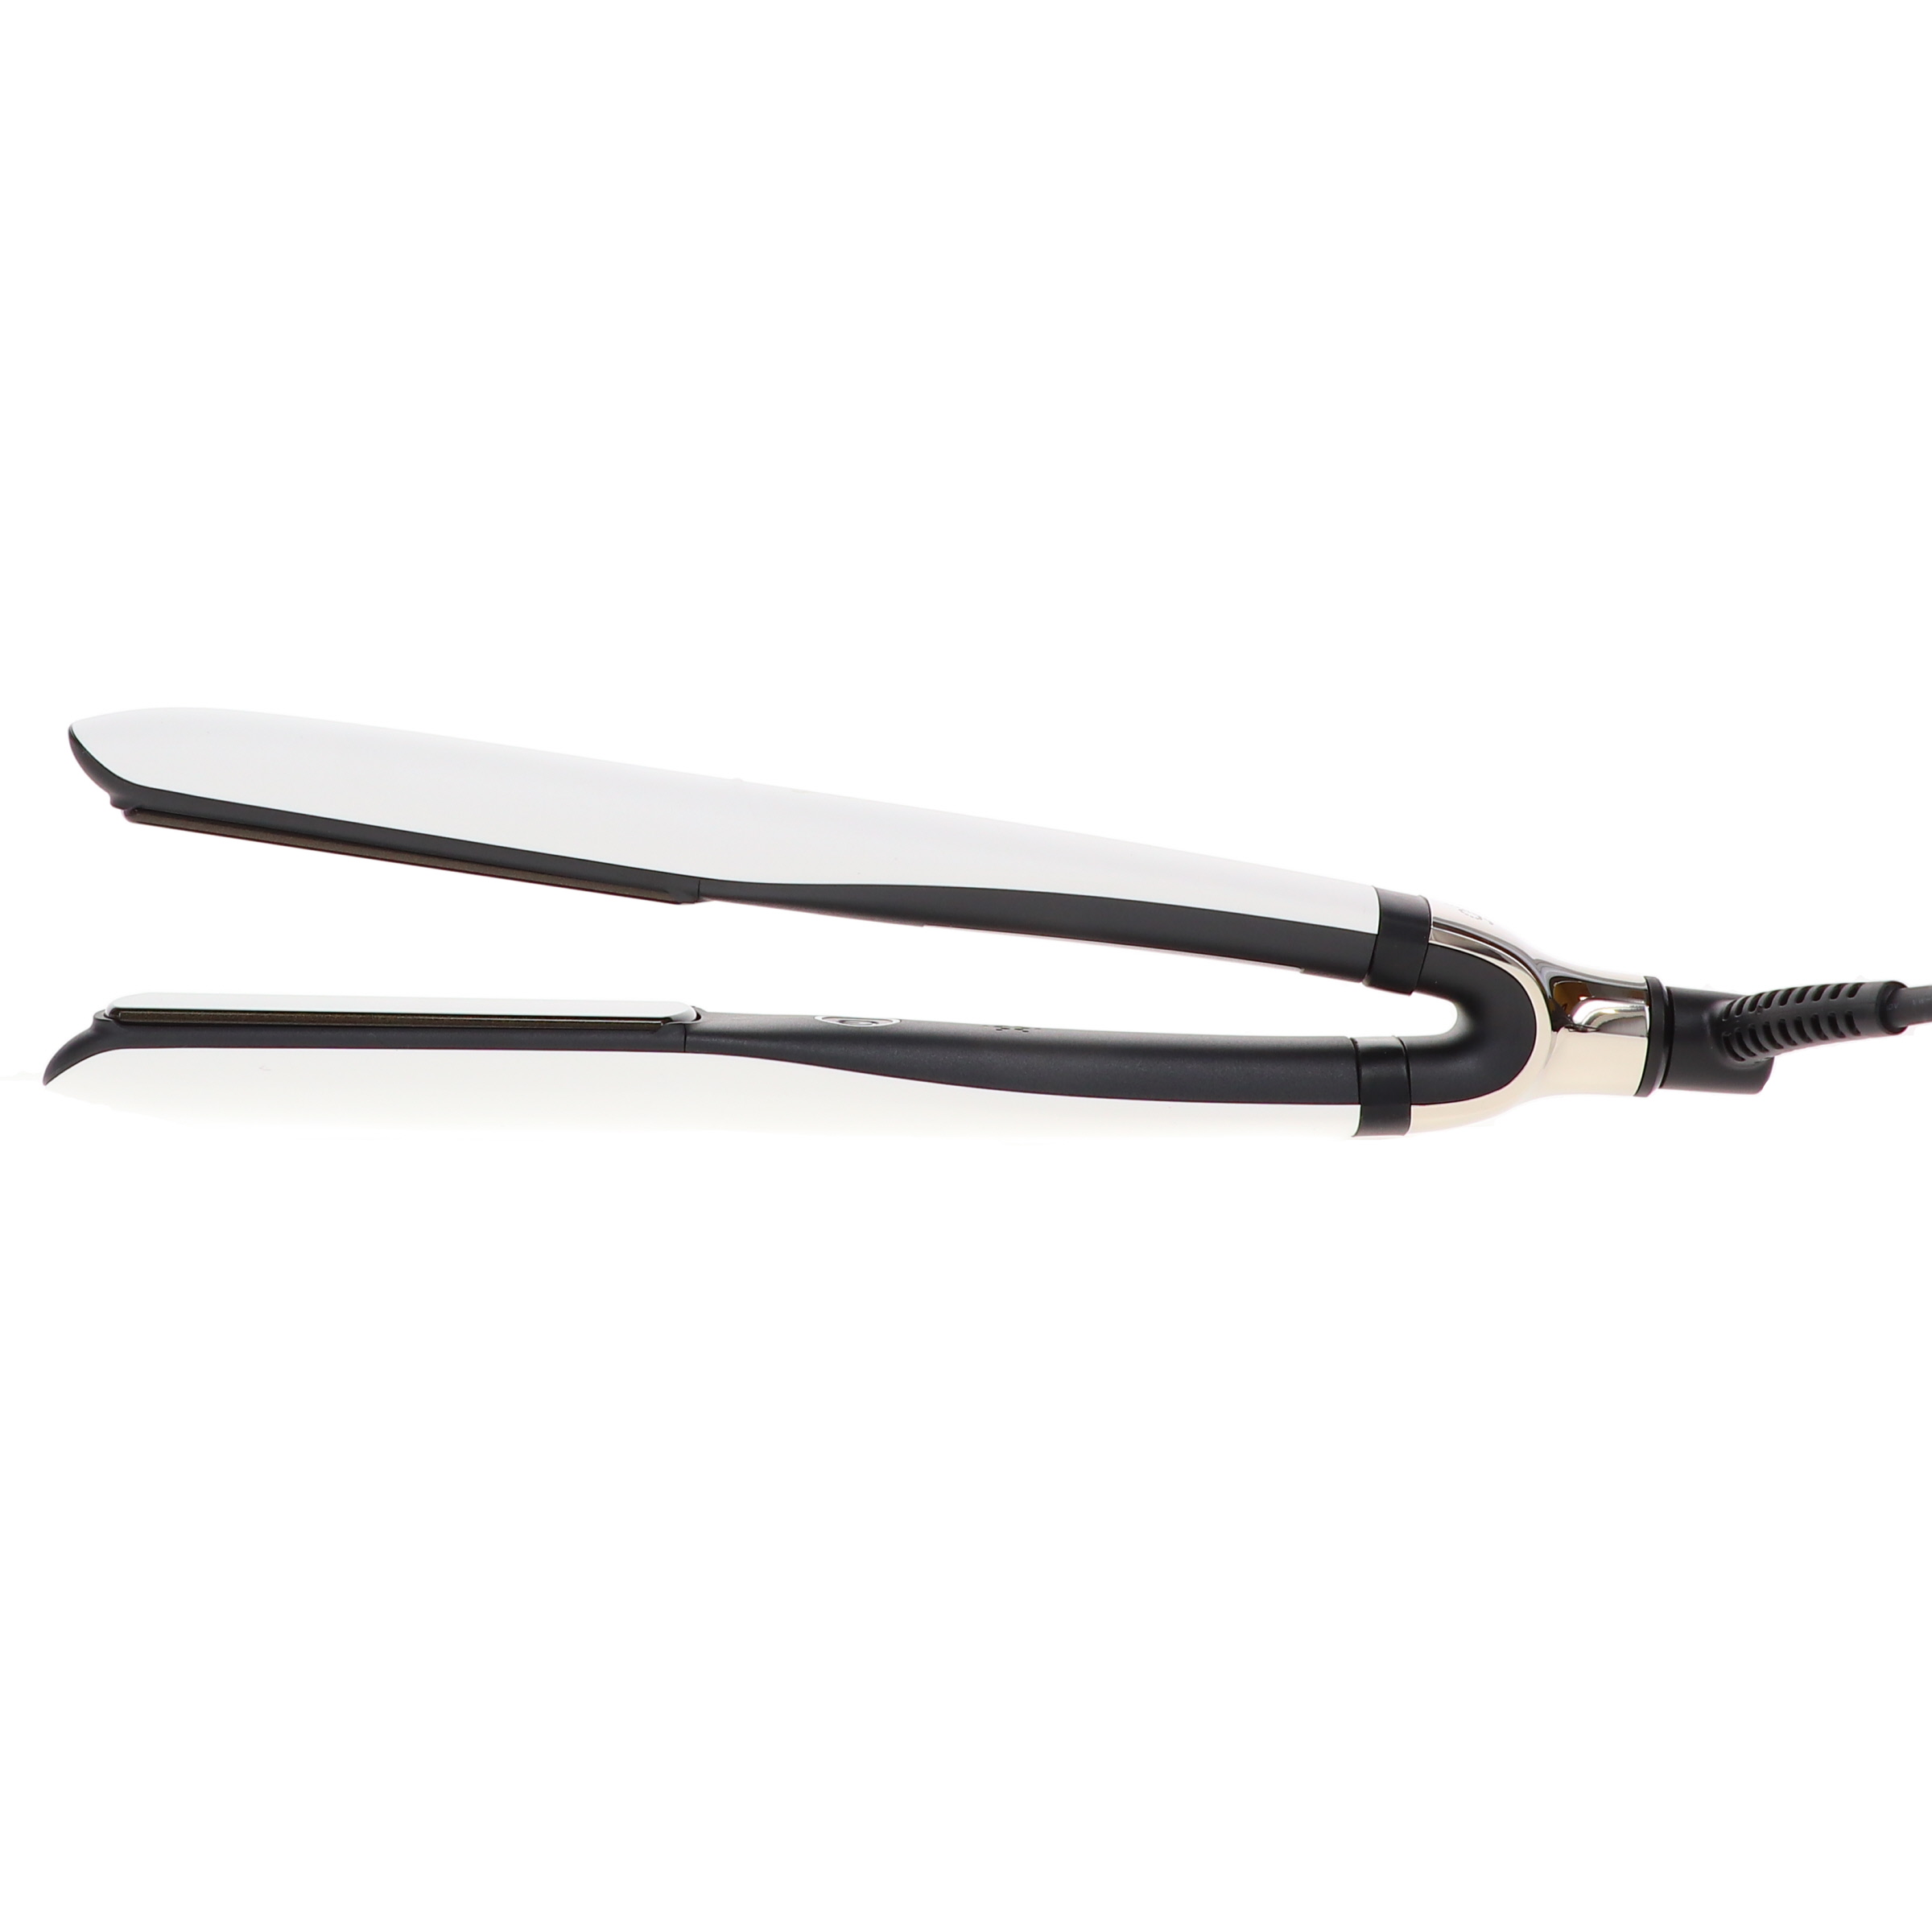 ghd Stylers Platinum + White 1 Styler - image 1 of 6